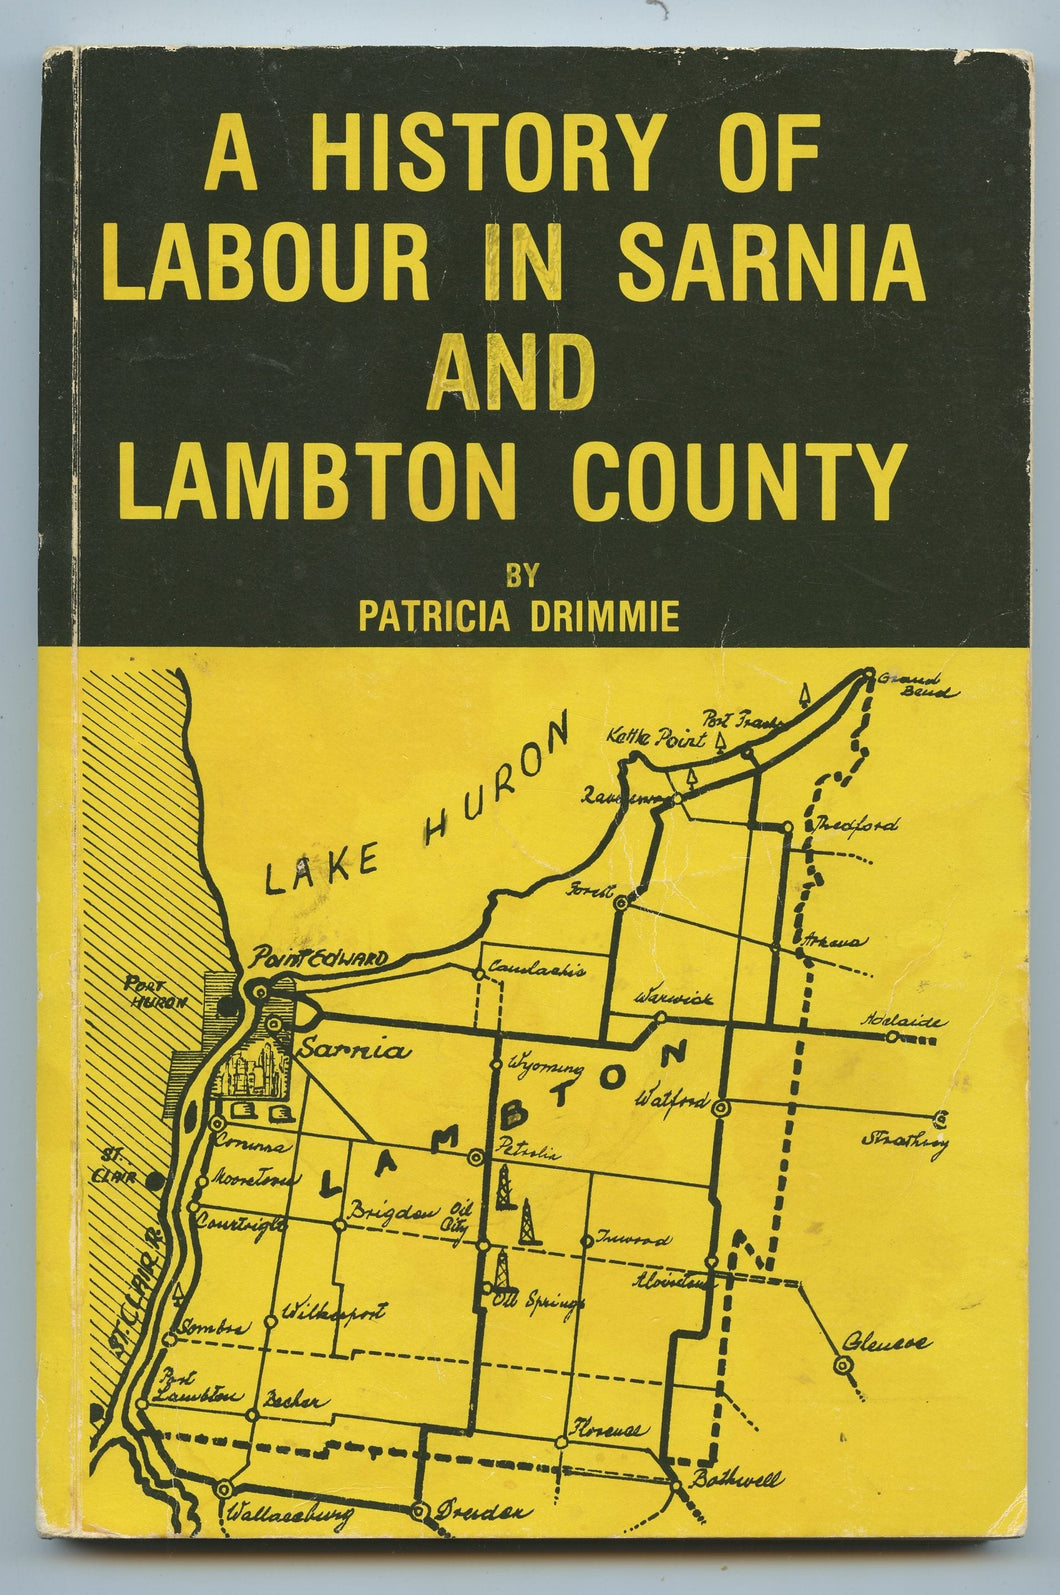 A History of Labour in Sarnia and Lambton County